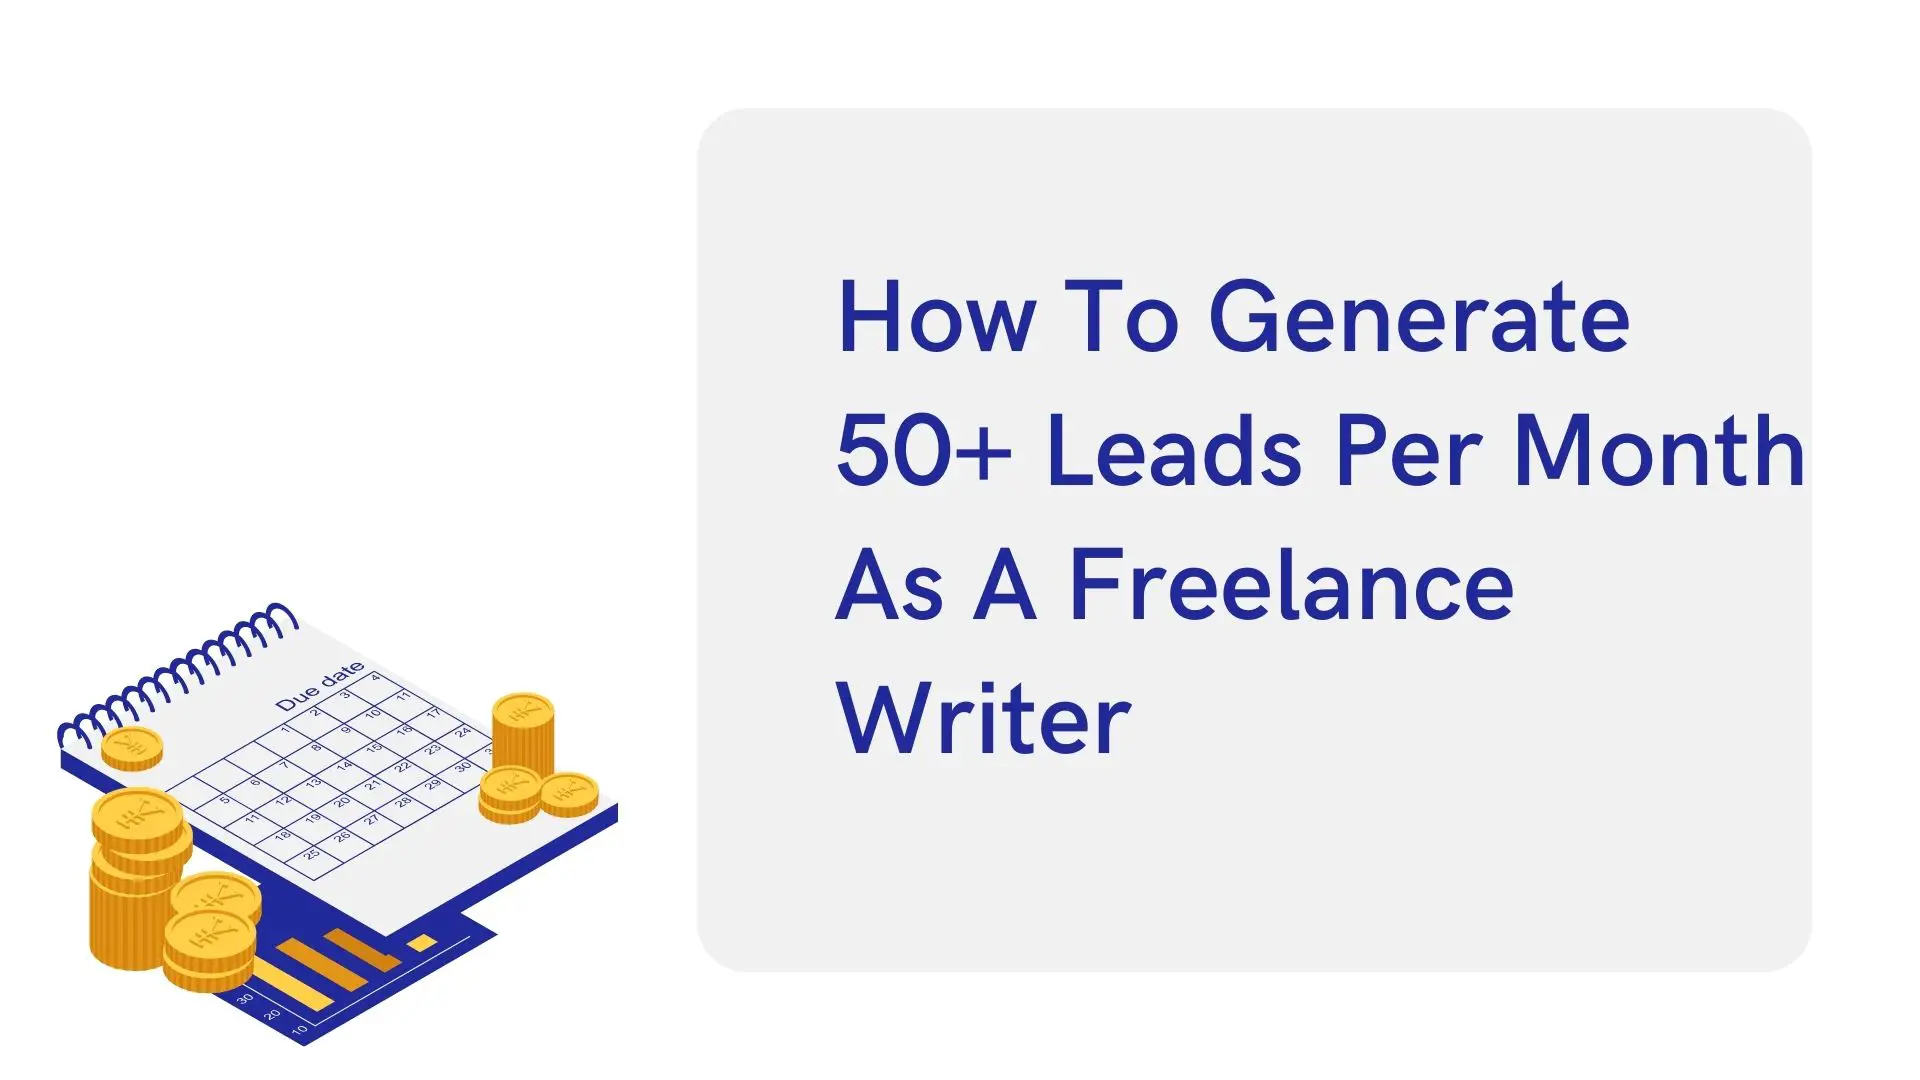 How To Generate 50+ Leads Per Month As A Freelance Writer